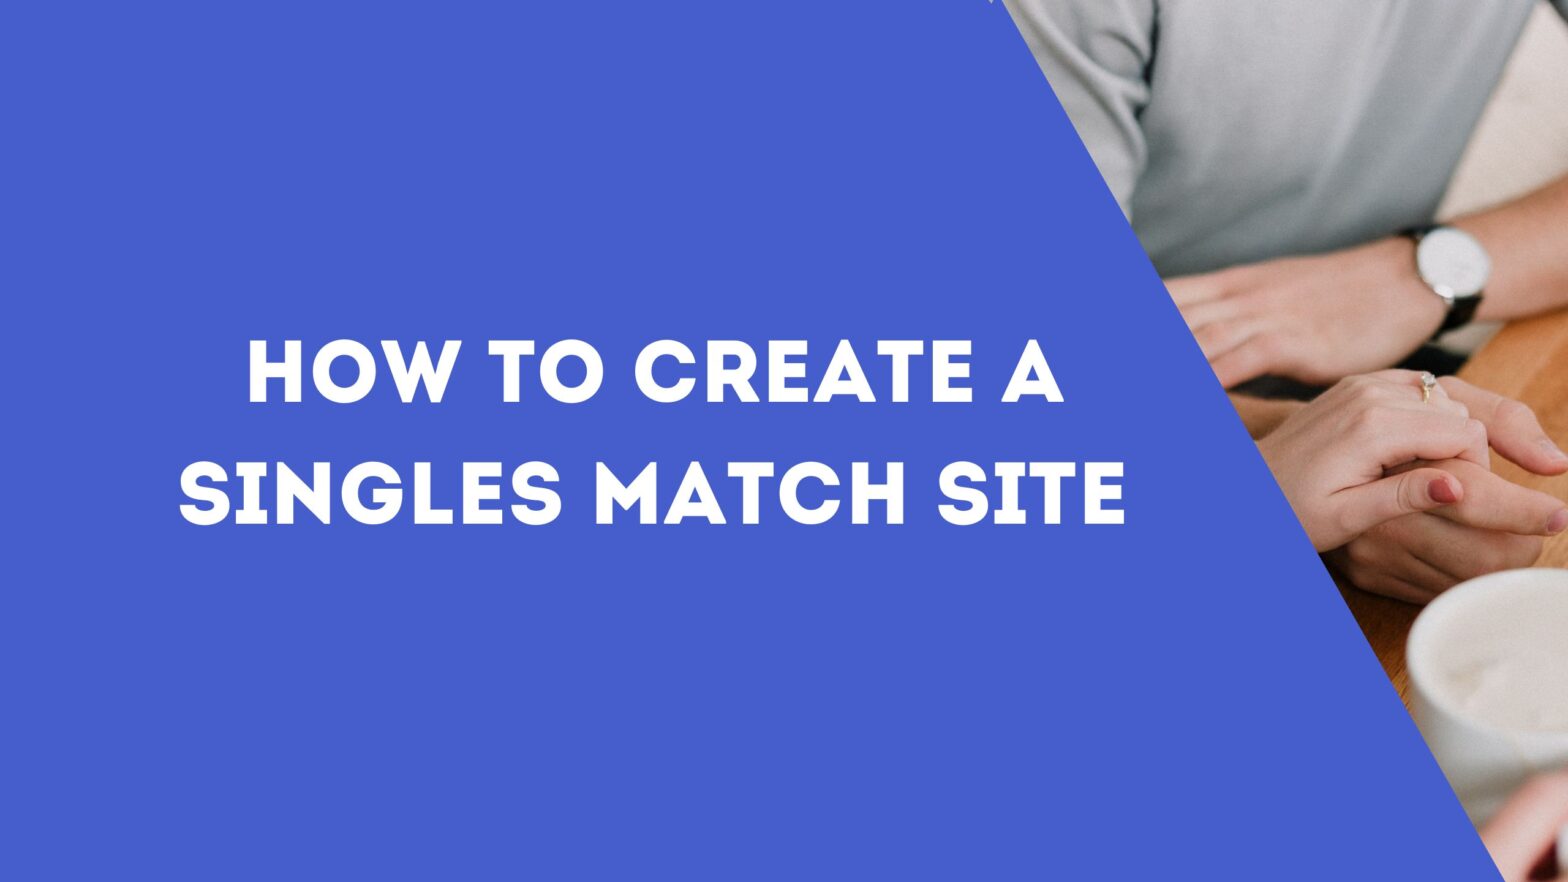 How to Create a Singles Match Site